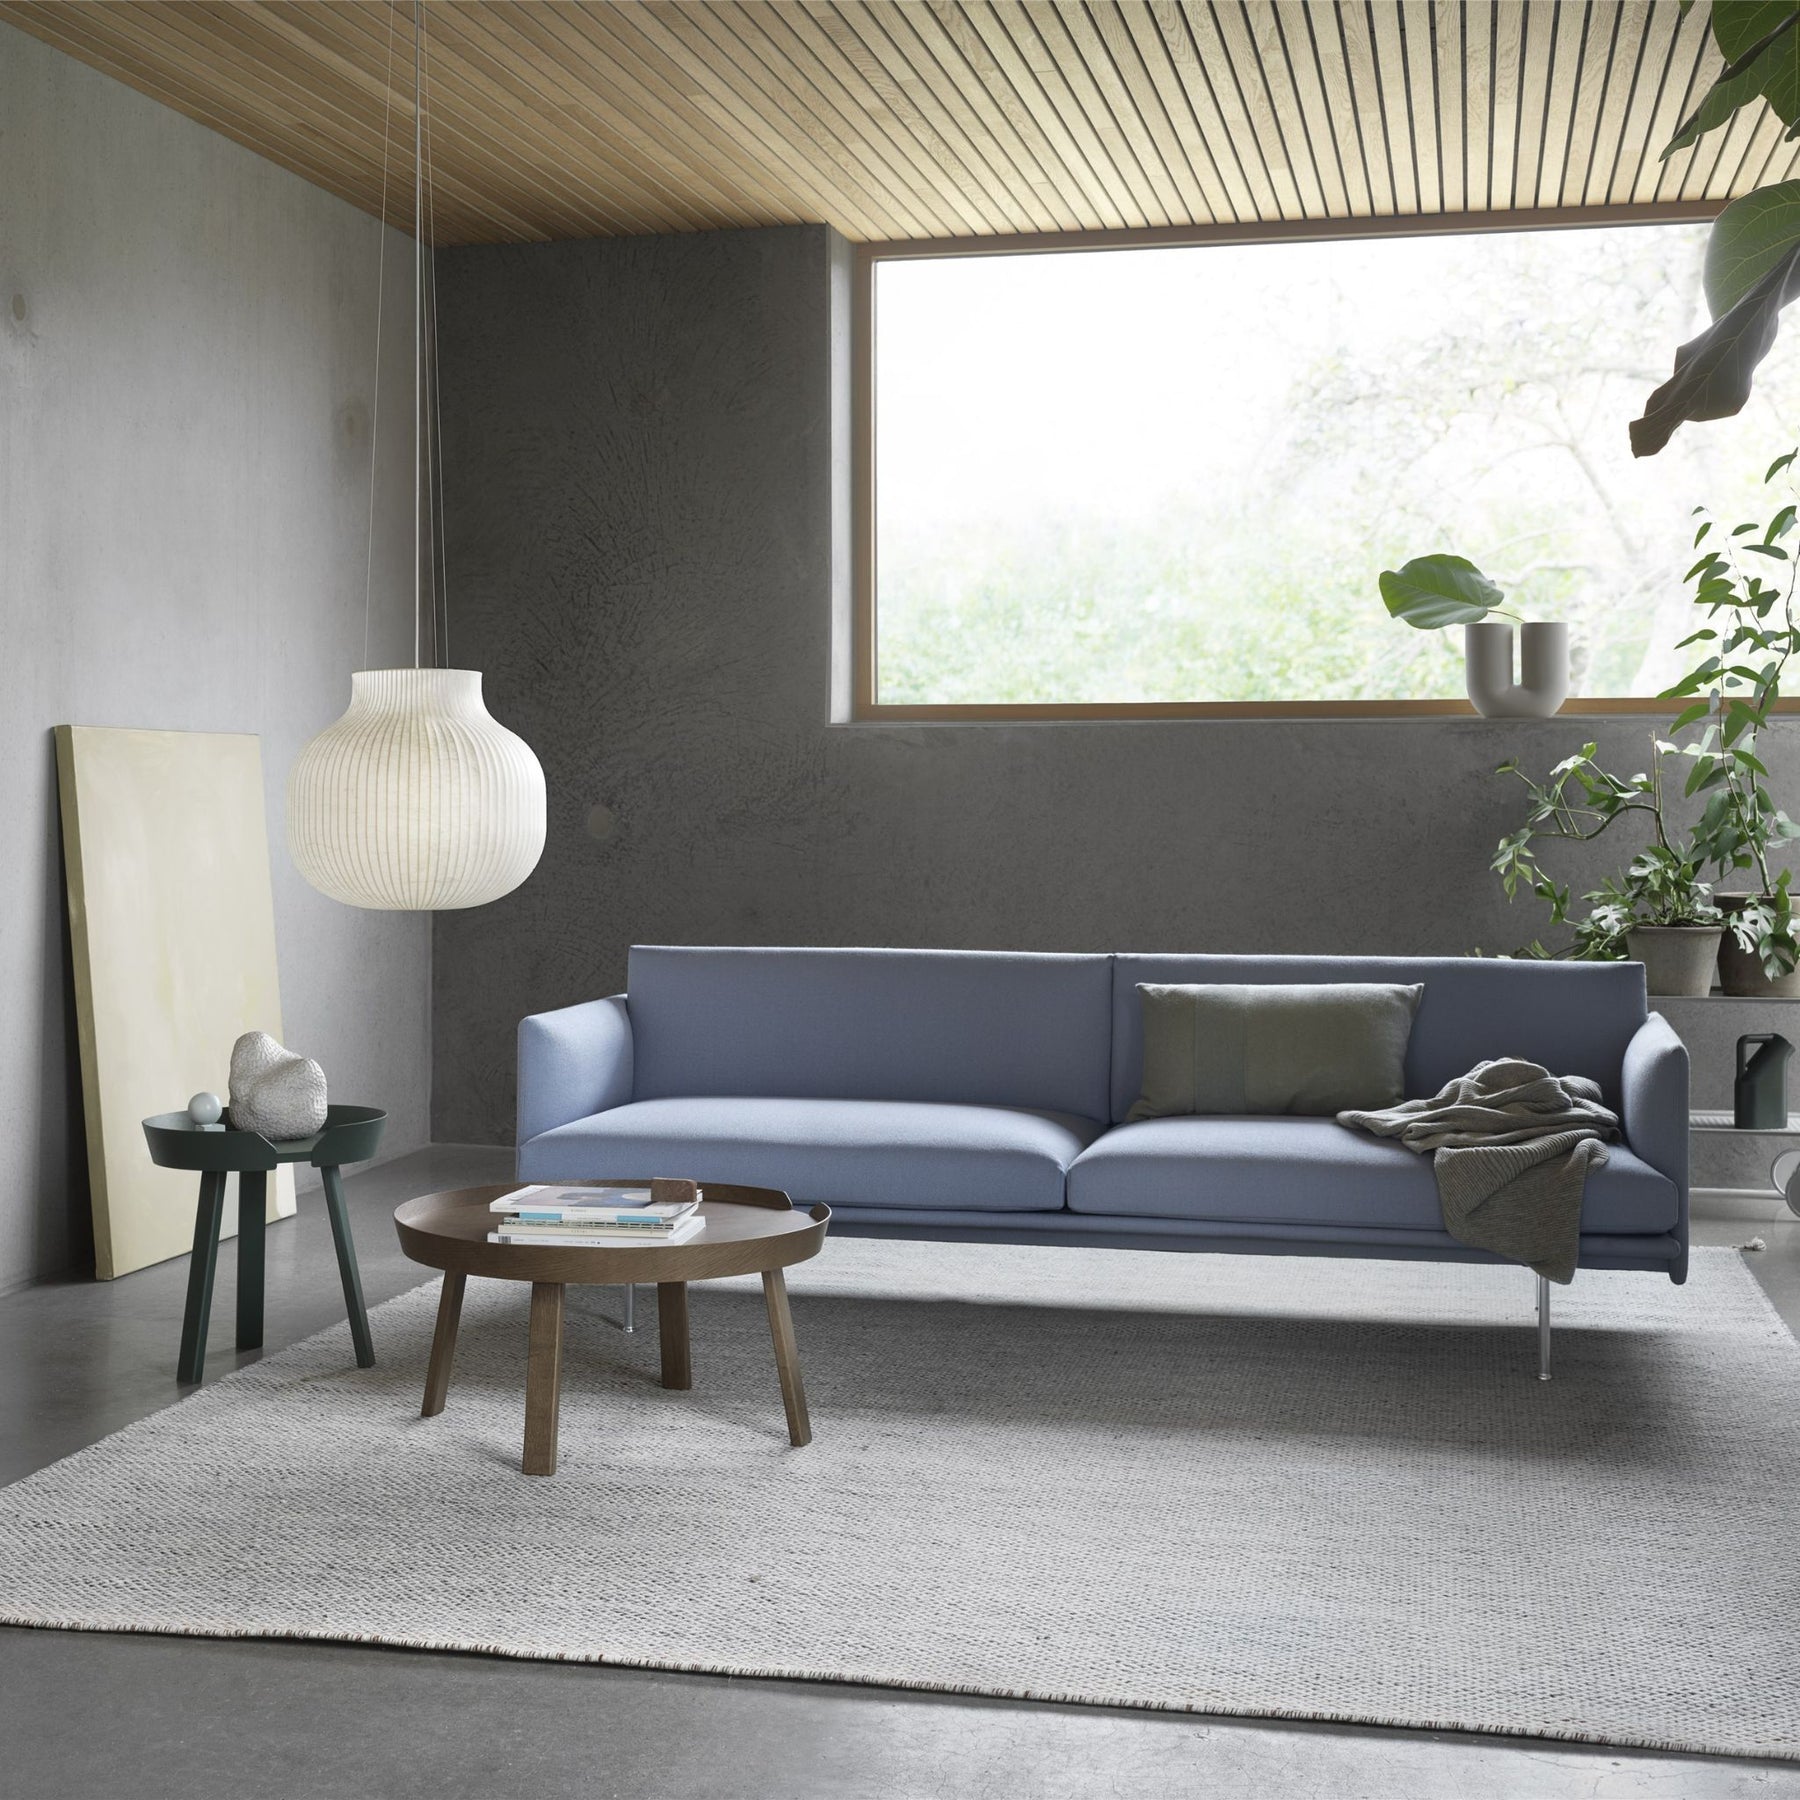 Muuto Around Coffee Tables in Living Room with Outline Sofa and Strand Pendant Light